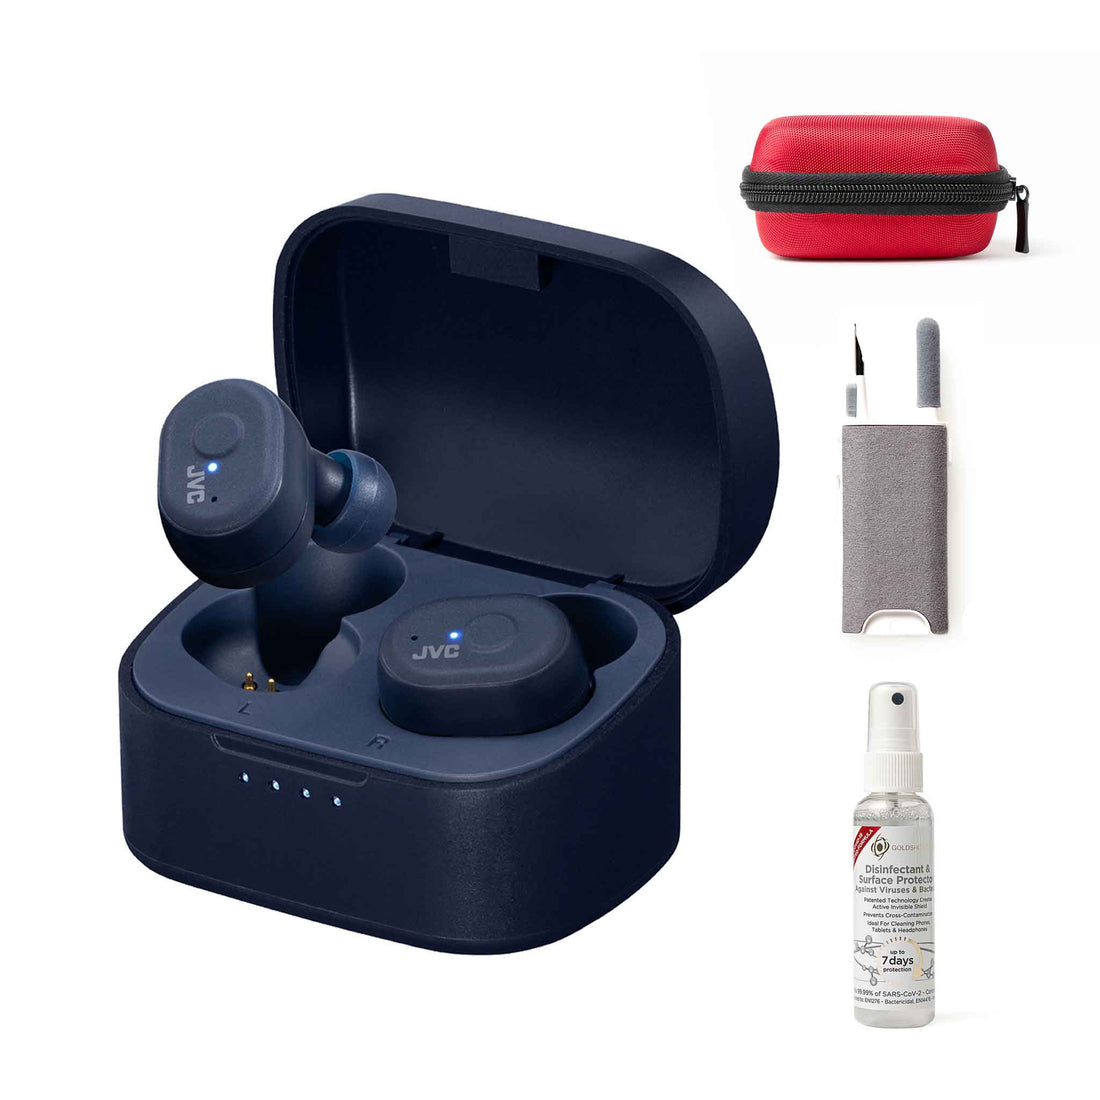 HA-A11T-A wireless earbuds, cleaning kit, case